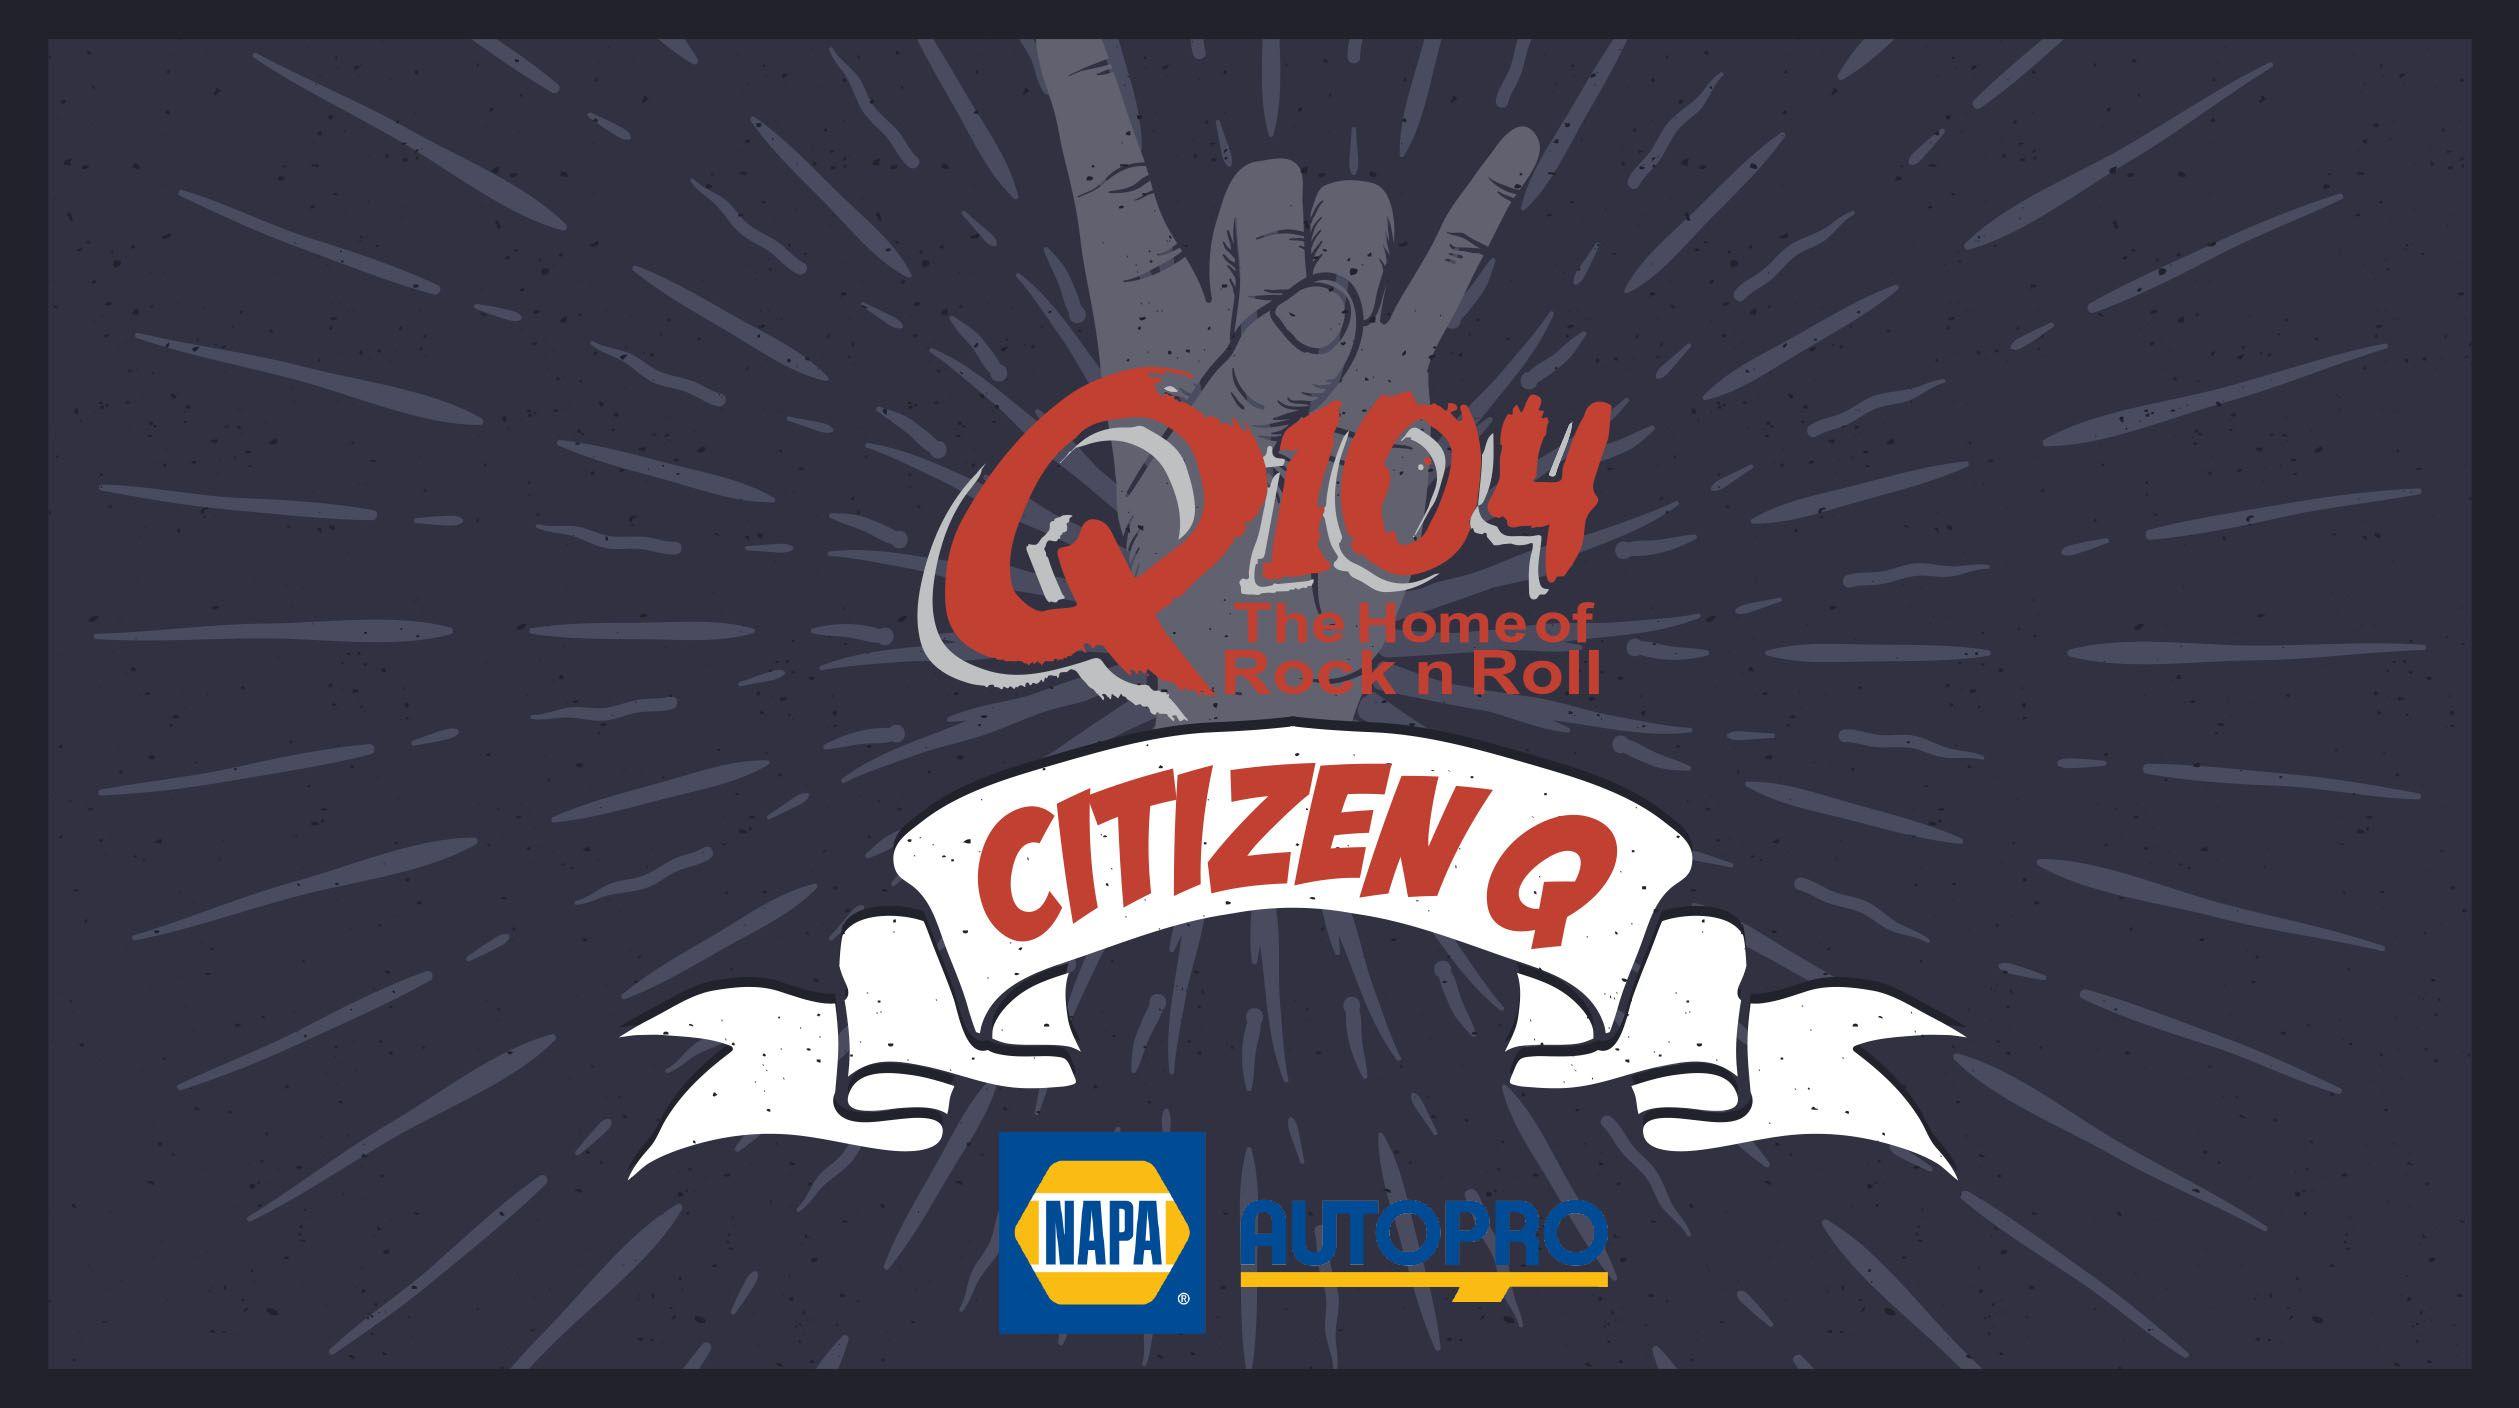 Q104.3 Logo - Citizen Q | Q104 - The Home of Rock and Roll - Halifax